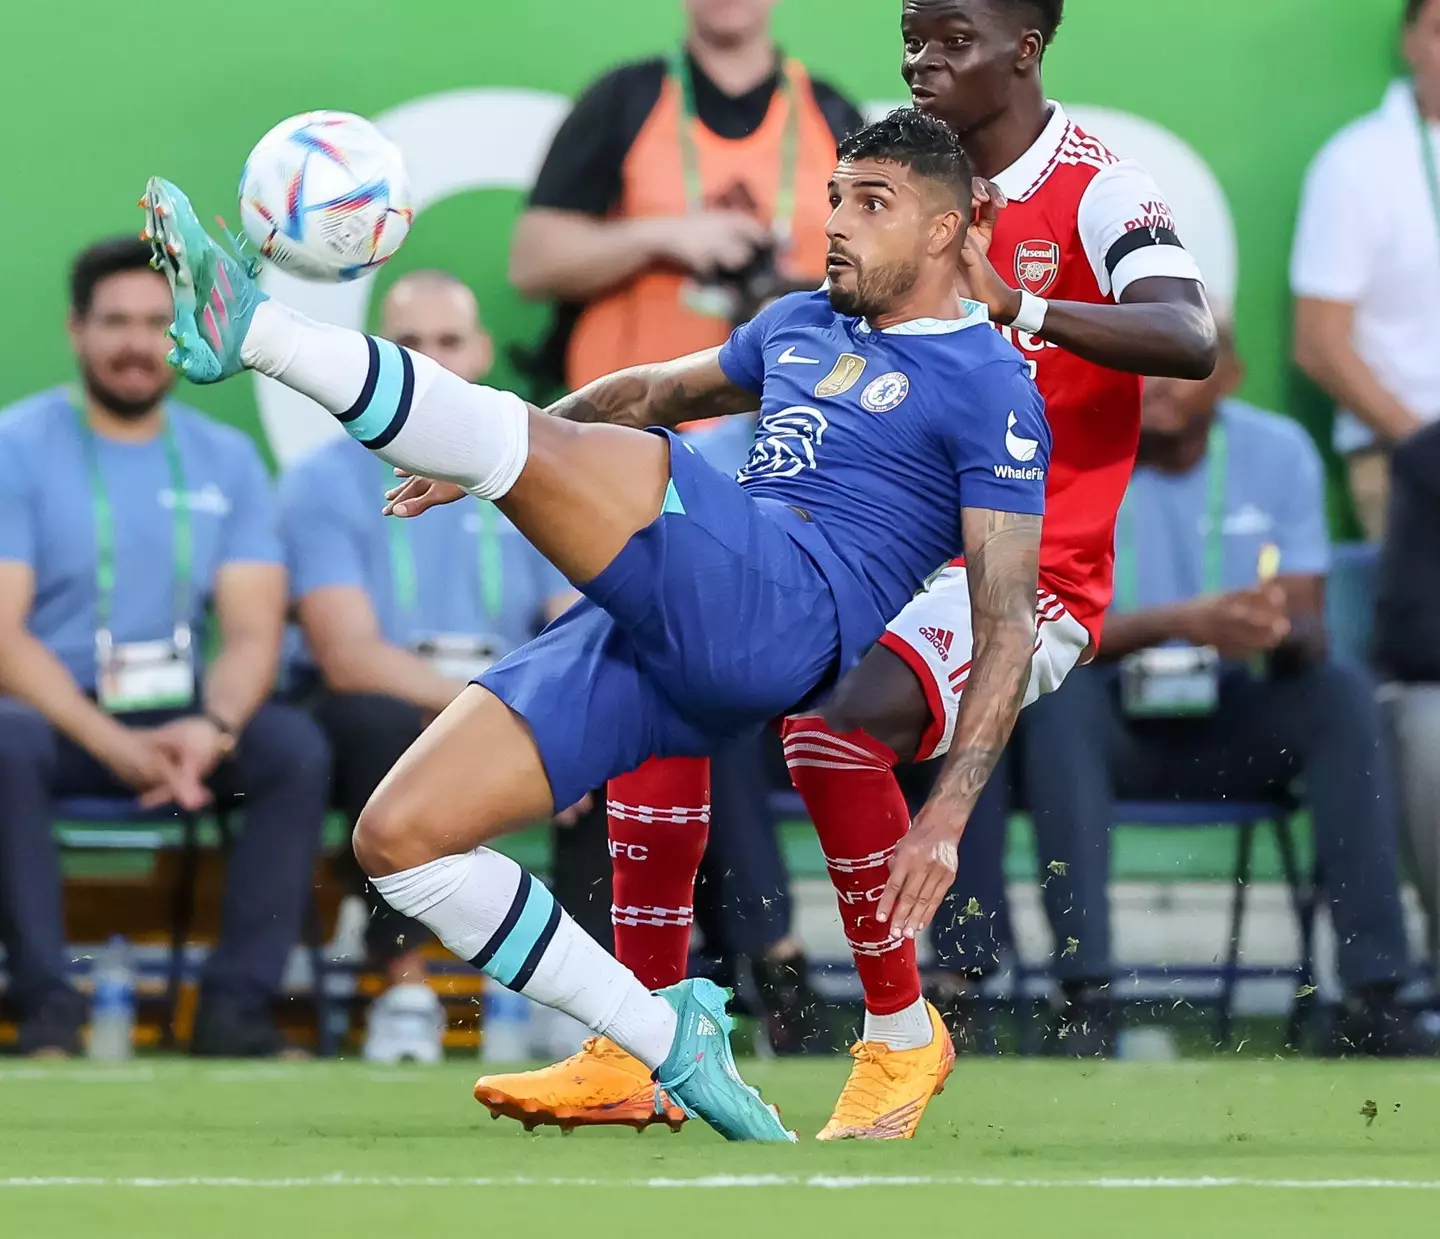 Chelsea defender Emerson Palmieri defends the ball during the Florida Cup Series Arsenal vs Chelsea FC. (Alamy)